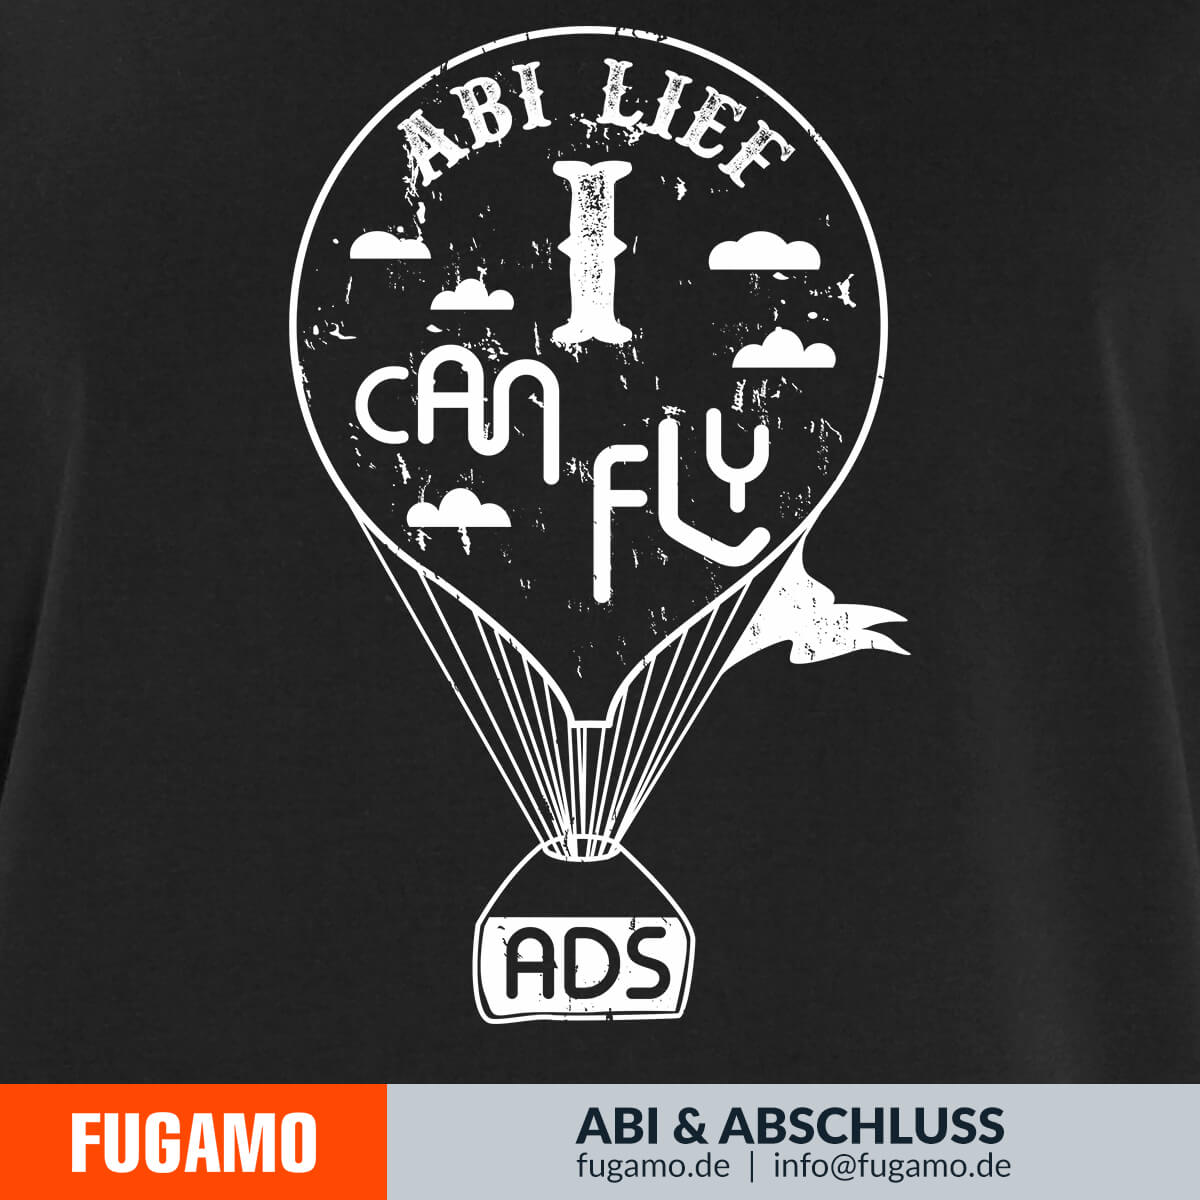 ABI lief i can fly - 02